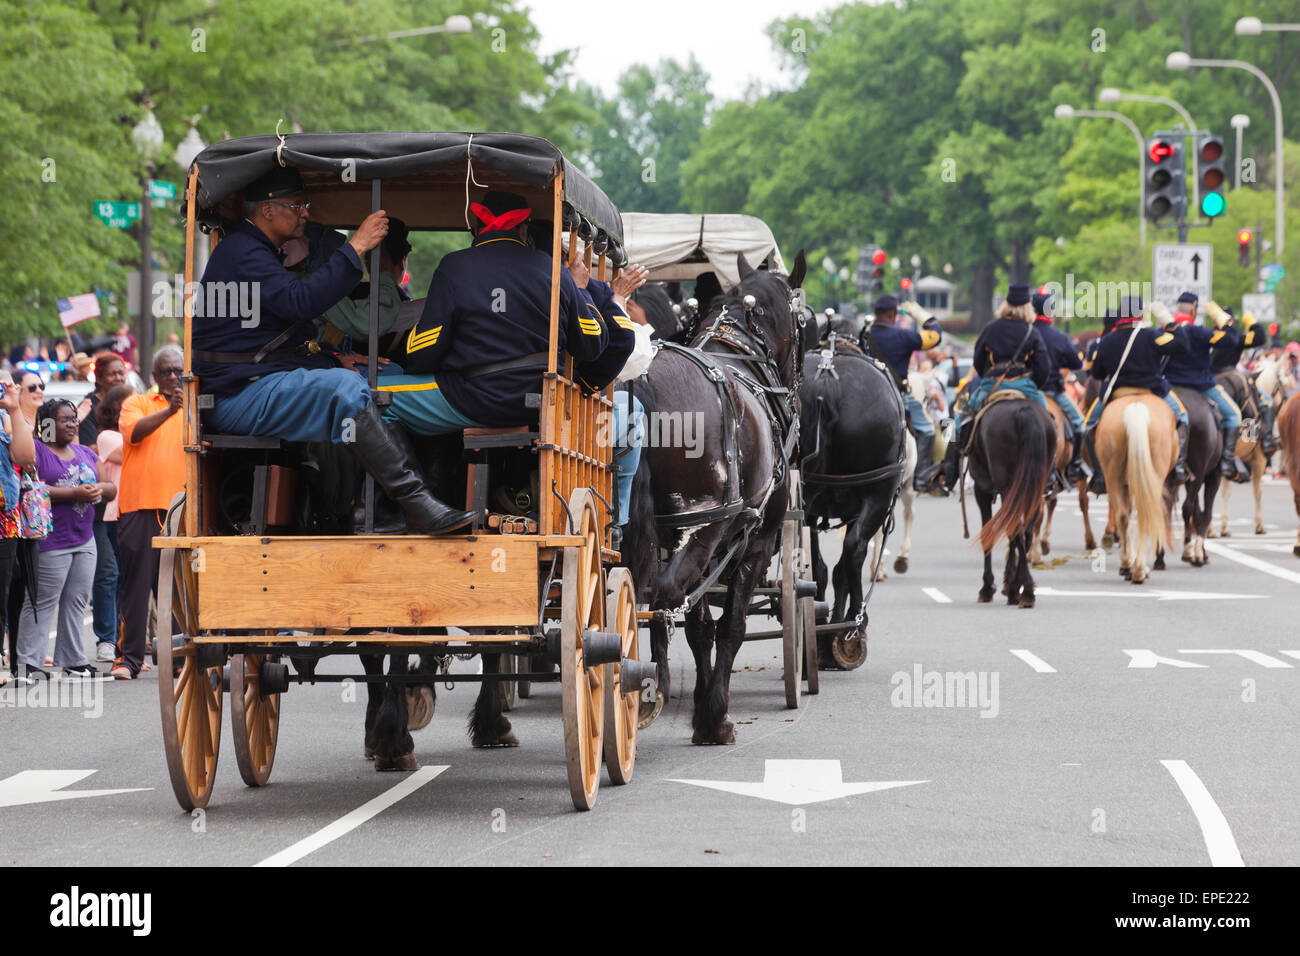 Washington, DC, USA. 17th May, 2015.  Thousands of Civil War reenactors march on Pennsylvania Avenue to celebrate the 150th anniversary of the Grand Review Victory Parade, which marked the end of the American Civil War in 1865. Credit:  B Christopher/Alamy Live News Stock Photo